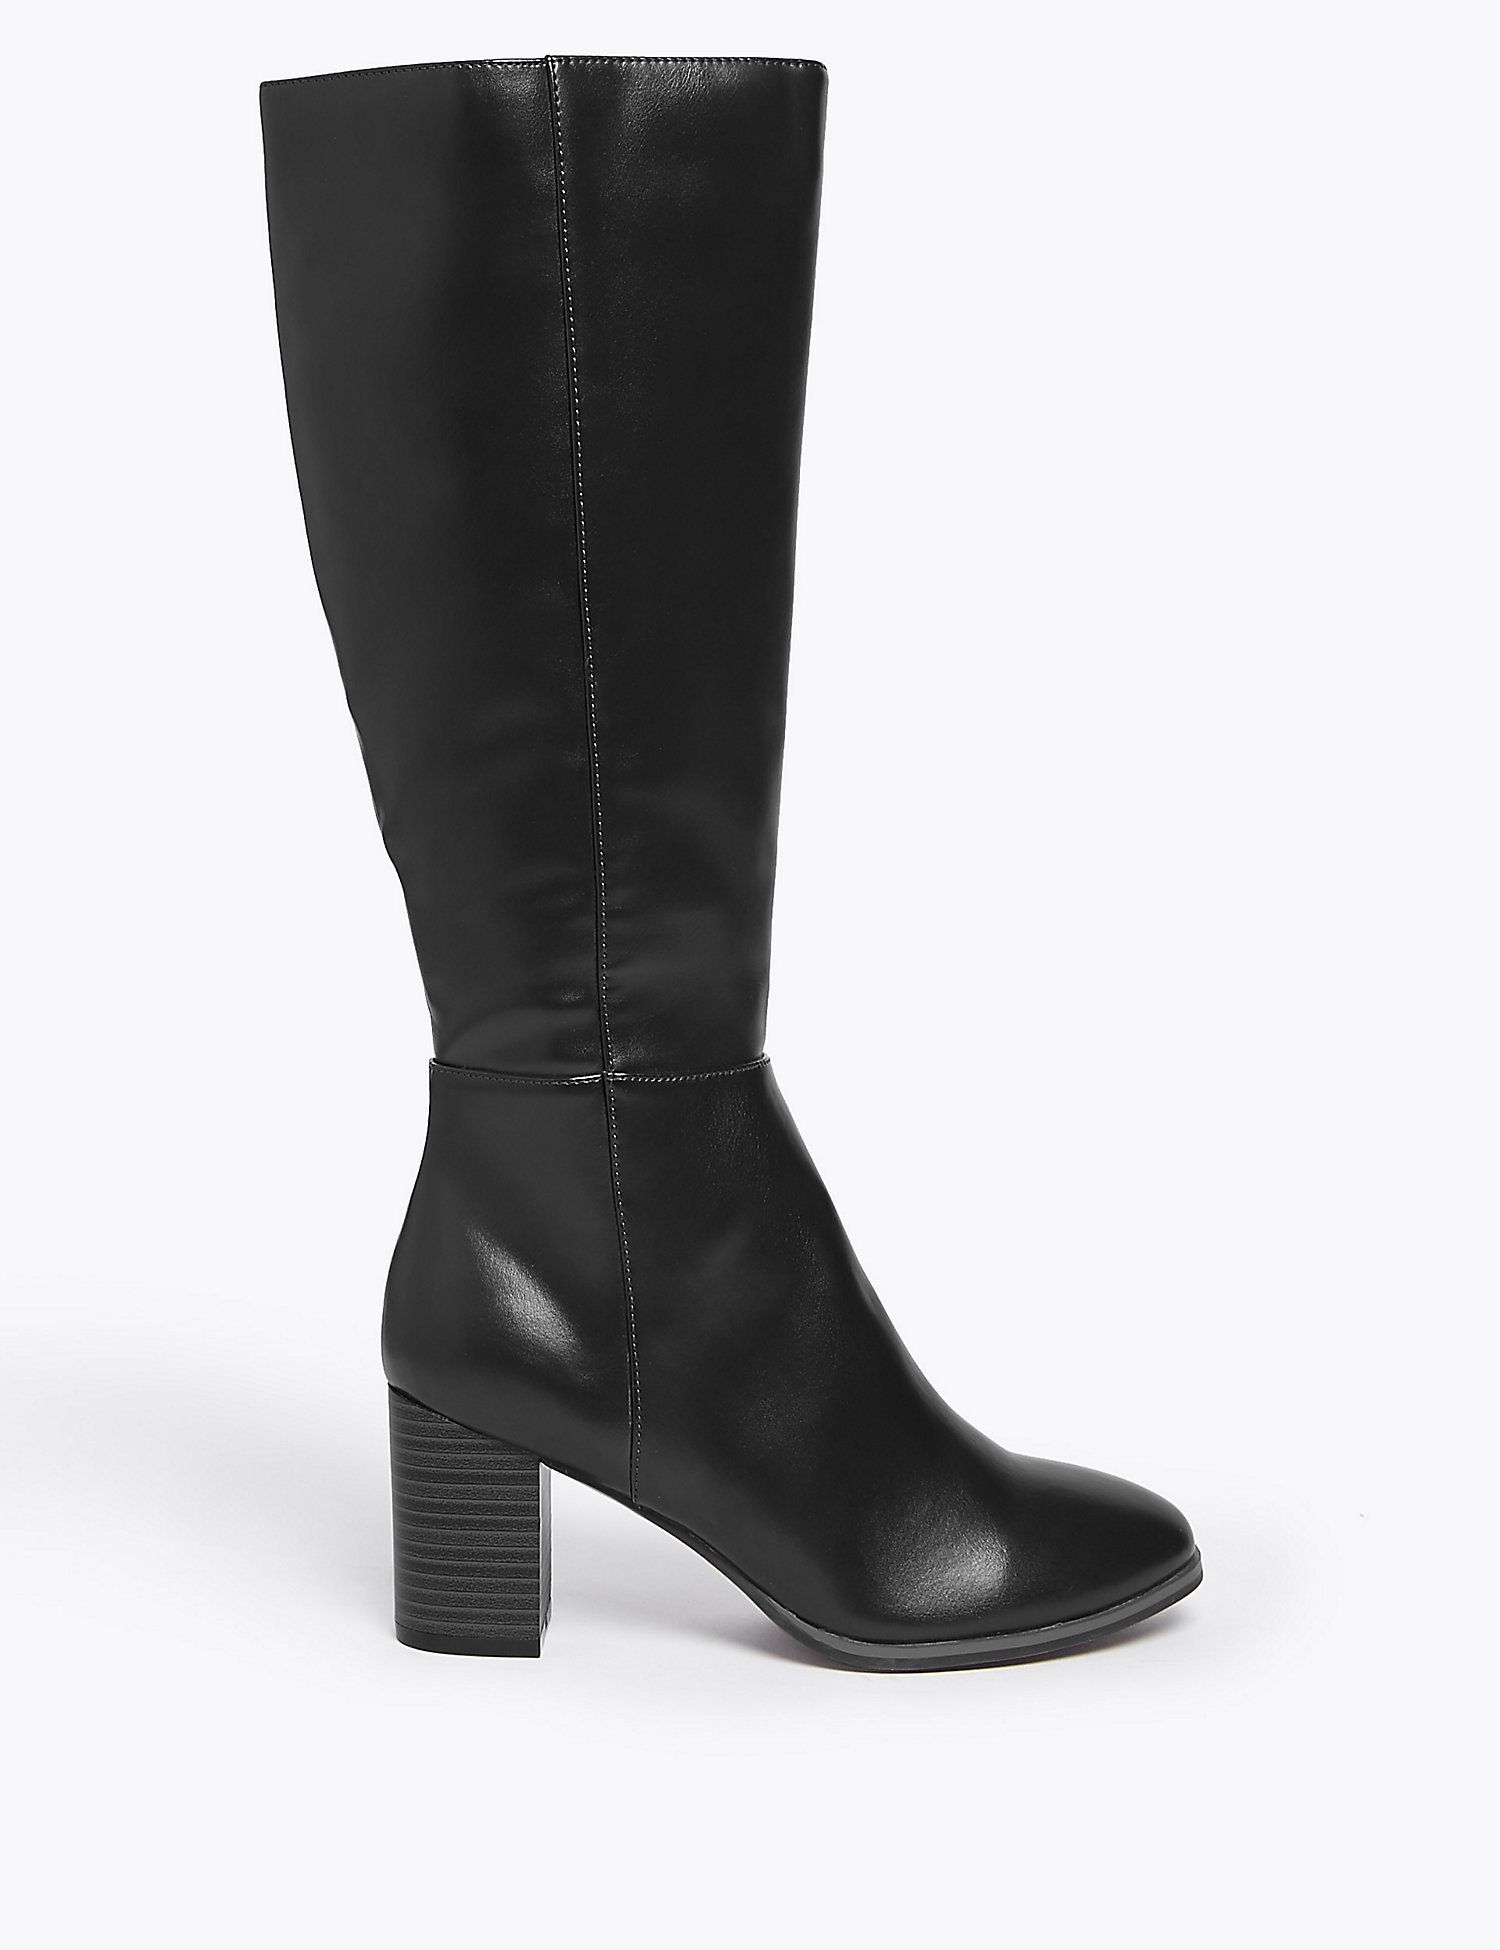 marks spencer boots ladies